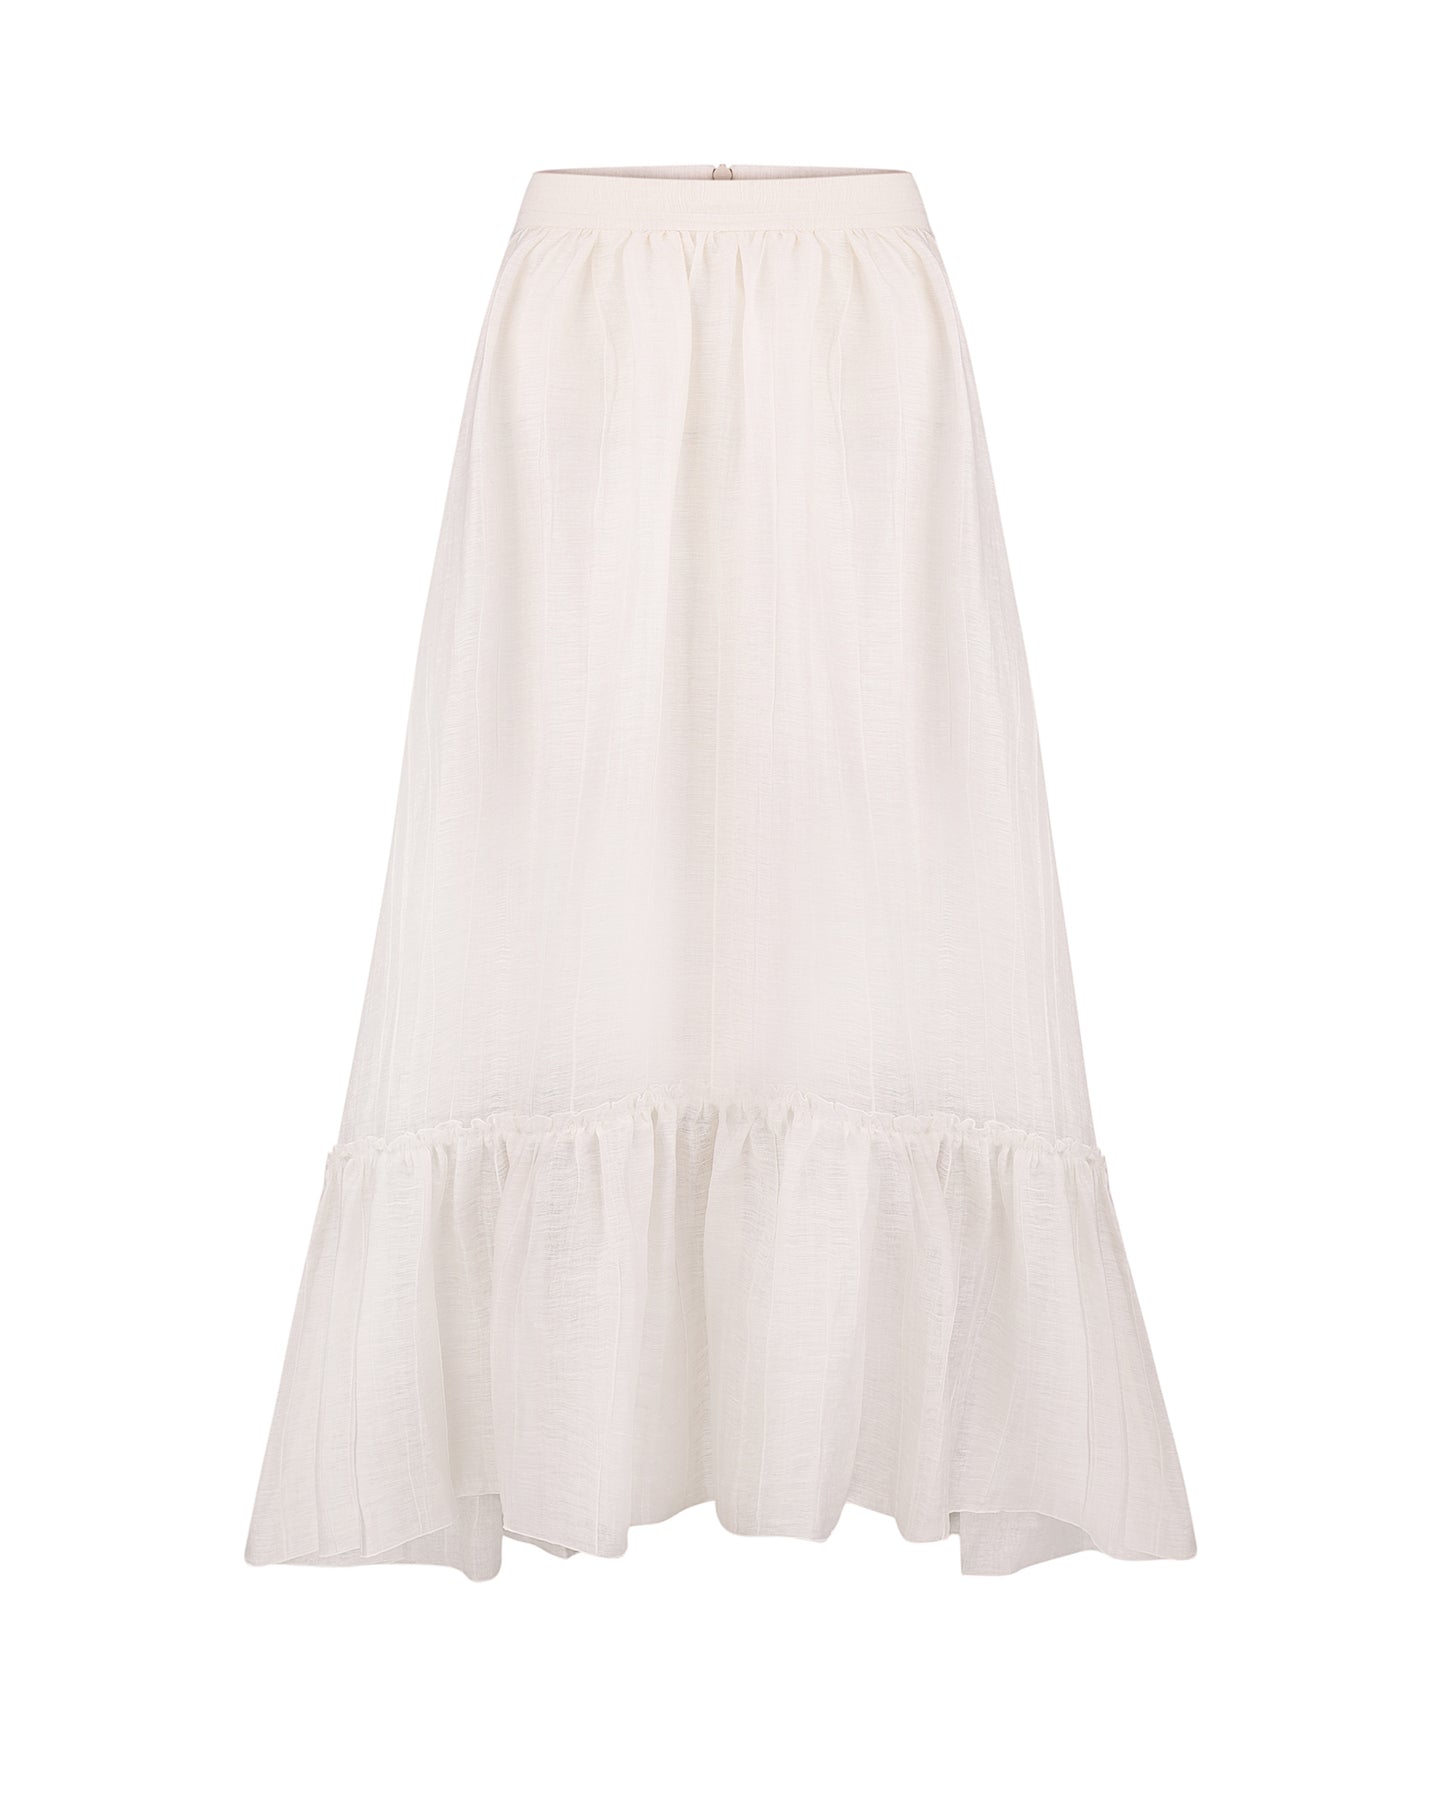 Maxi skirt with ruffle in milk